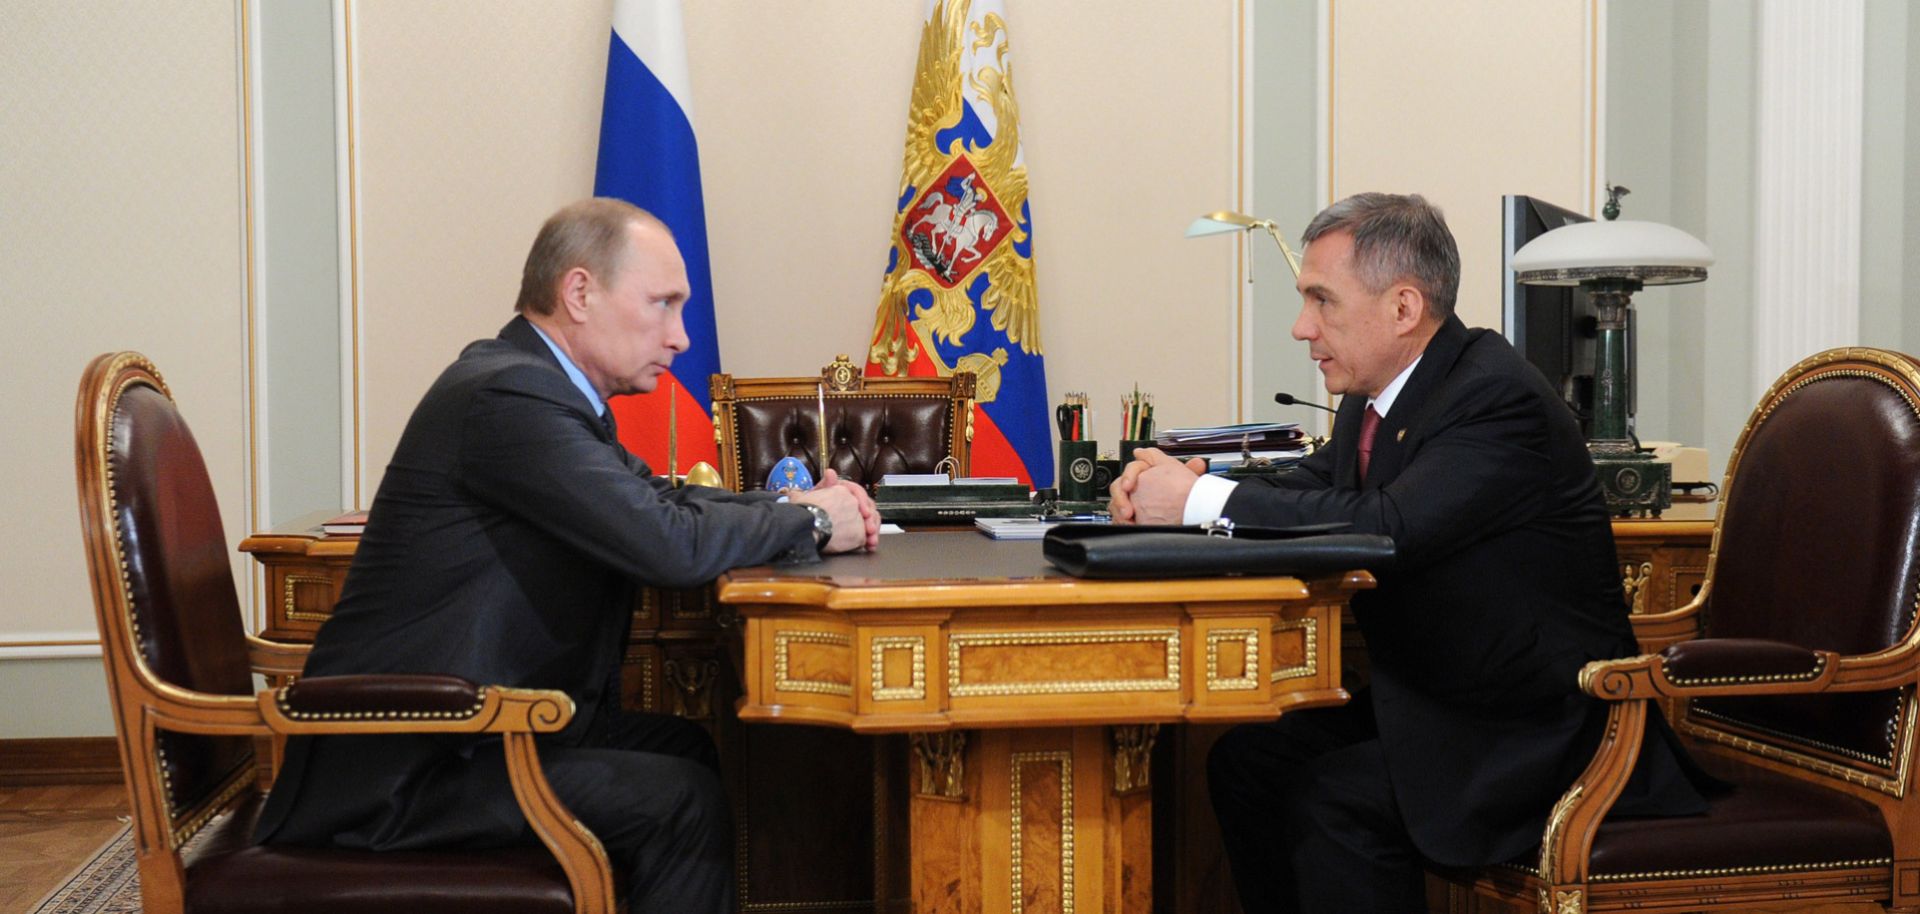 Russian President Vladimir Putin (L) can respond one of two ways to criticism from Rustam Minnikhanov, the leader of Tatarstan: Offer the republic financial concessions or purge the popular outspoken critic of his administration.